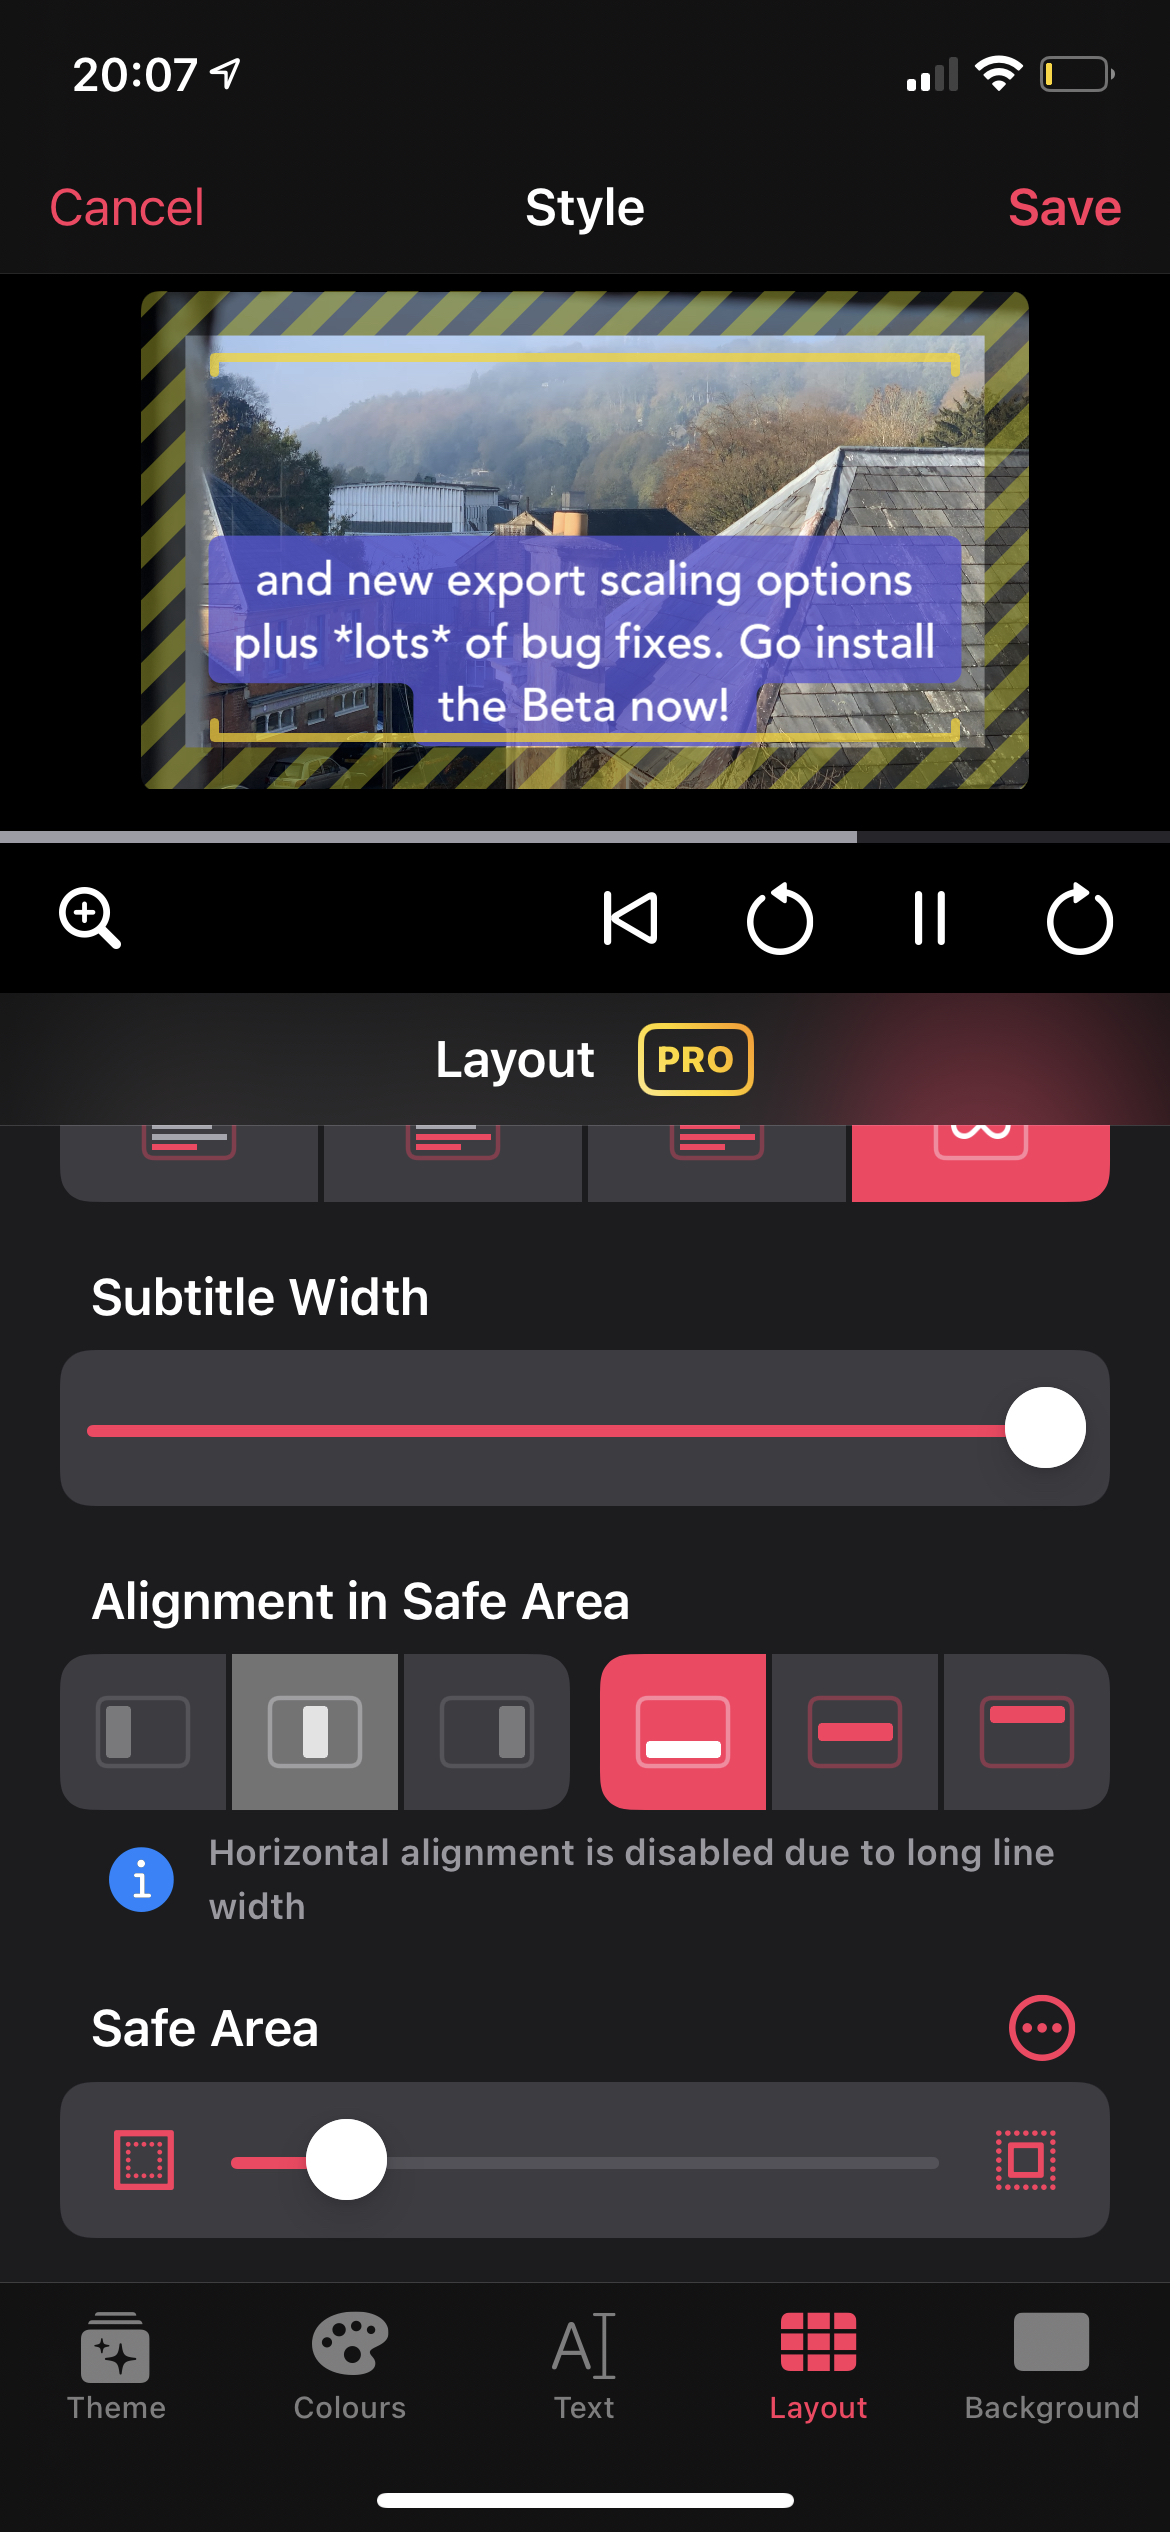 Screenshot of a the new styling UI showing the layout options